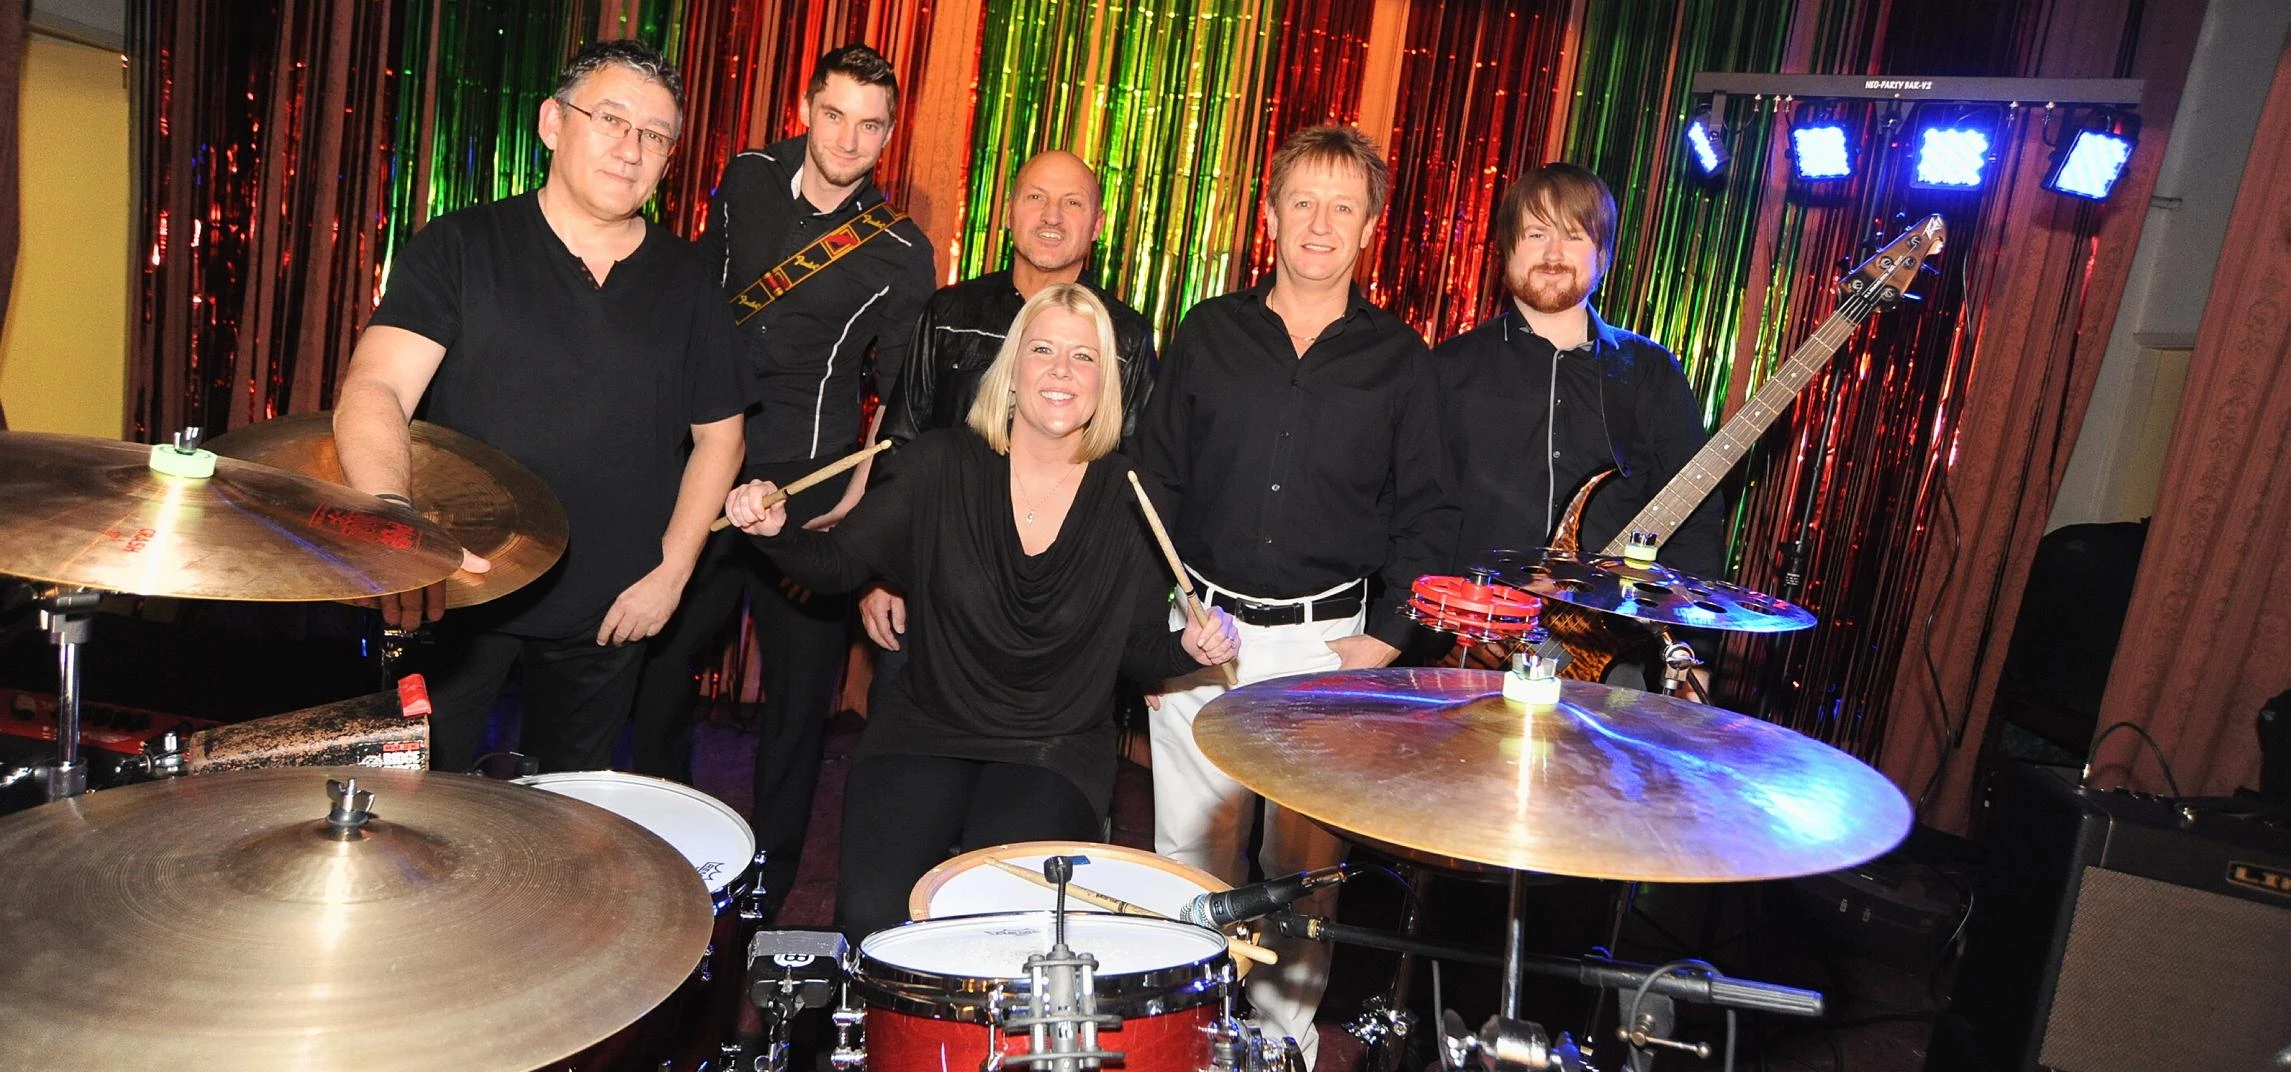 Picture caption: Helen Coombes of HB&O (centre) with Coventry covers band Rewind (from left to right